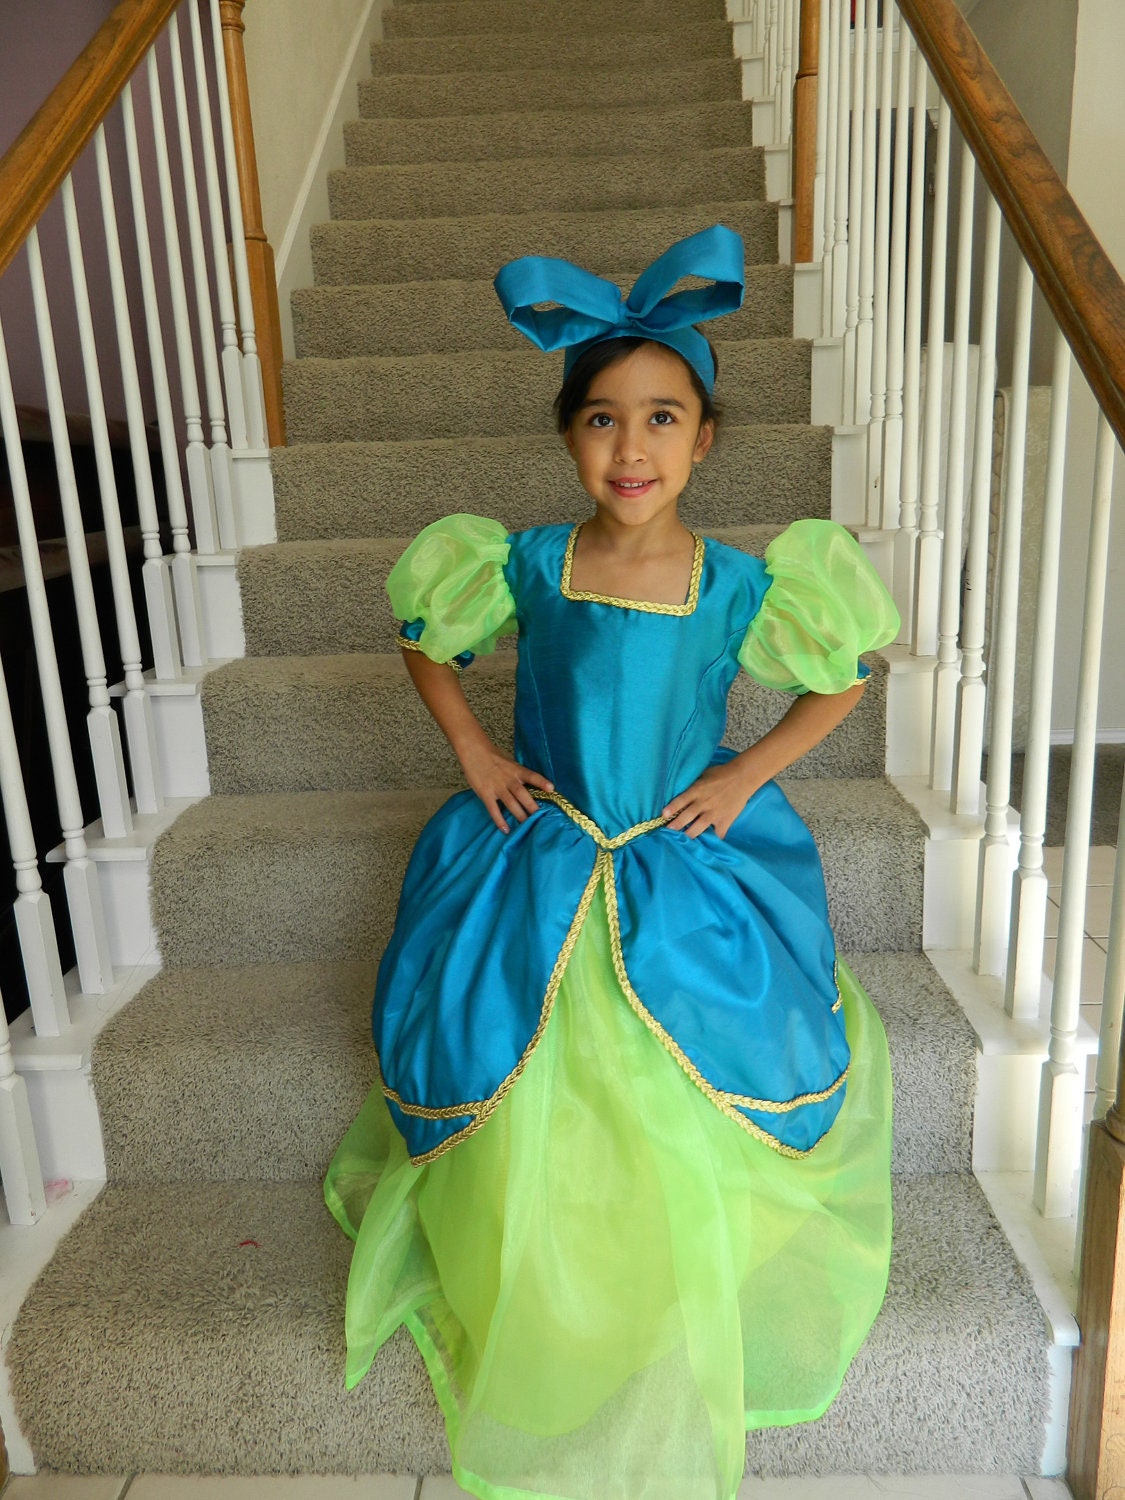 Drizella Costume, Cinderella's Wicked Step Sister Costume,  Inspired from Cinderella Fairytale